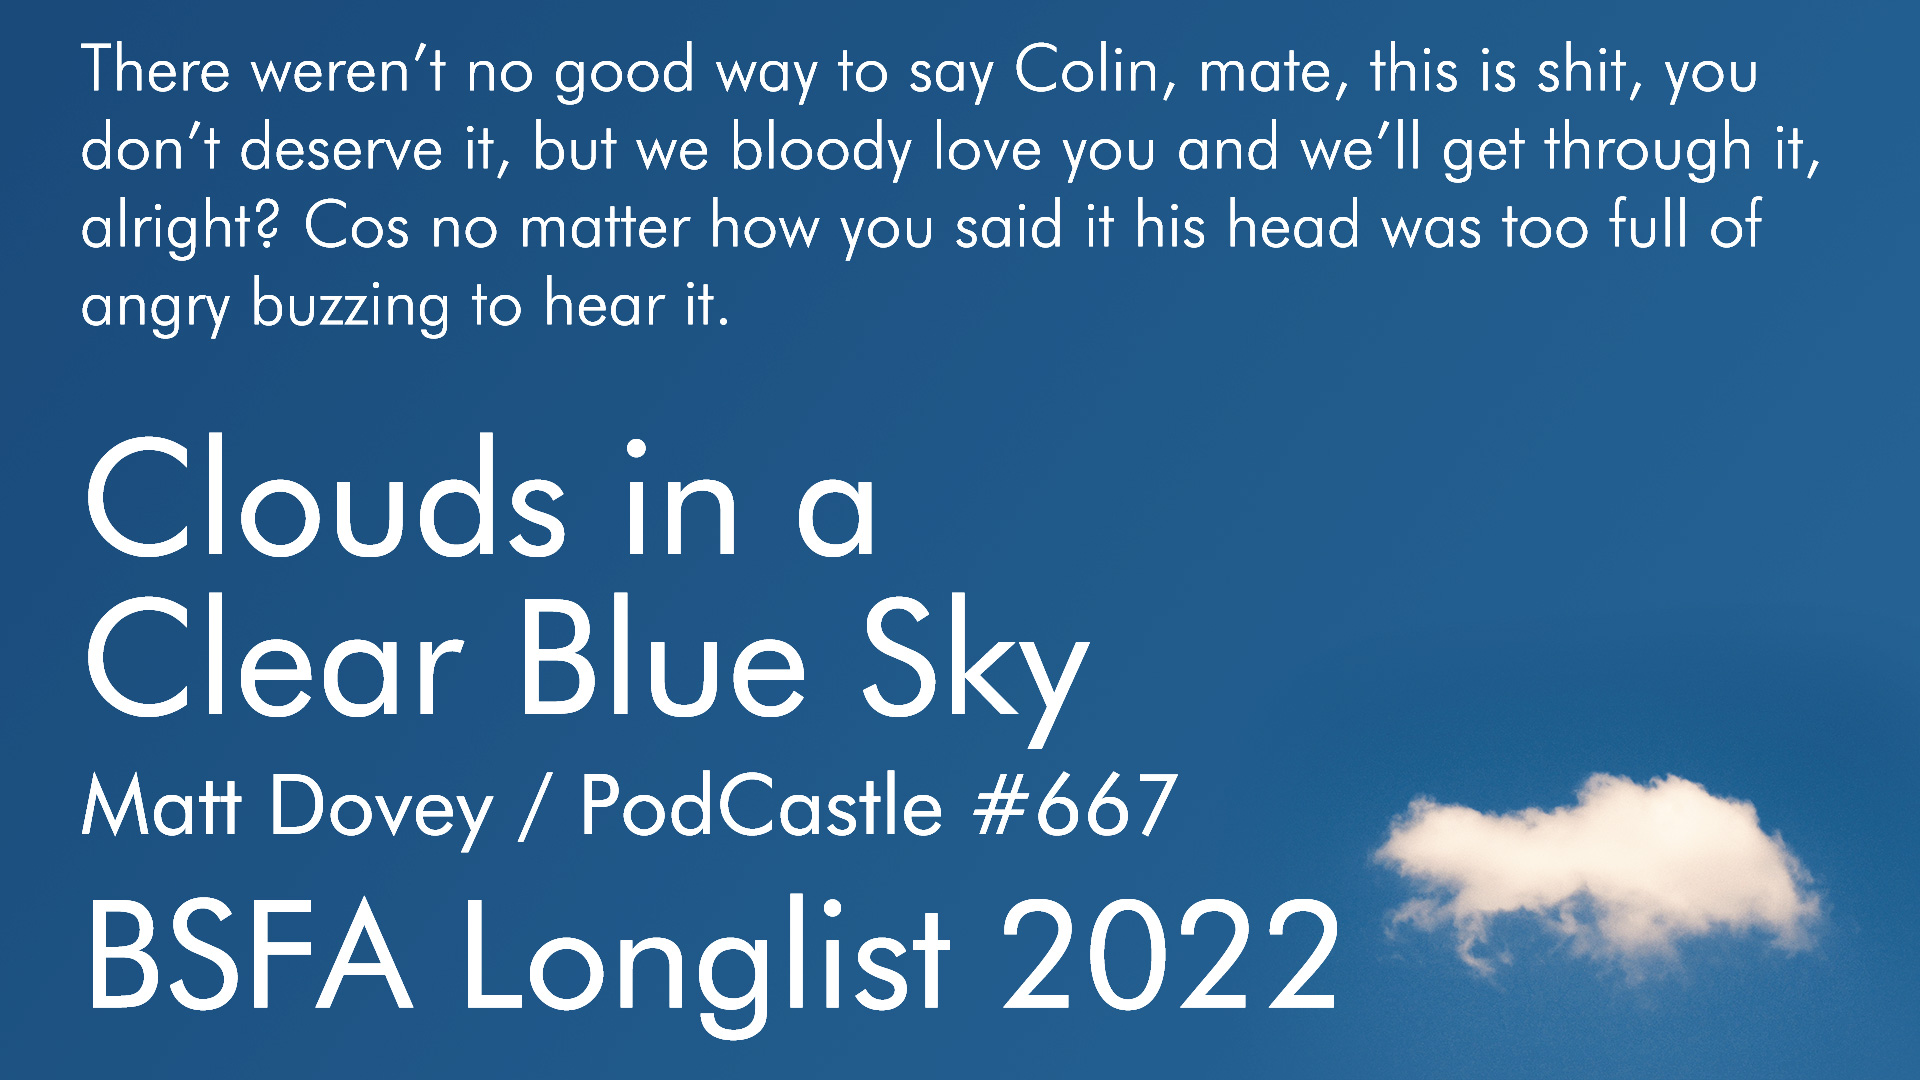 There weren't no good way to say Colin, mate, this is shit, you don't deserve it, but we bloody love you and we'll get through it, alright? Cos no matter how you said it his head was too full of angry buzzing to hear it. Clouds in a Clear Blue Sky. Matt Dovey / PodCastle #667. BSFA Longlist 2022